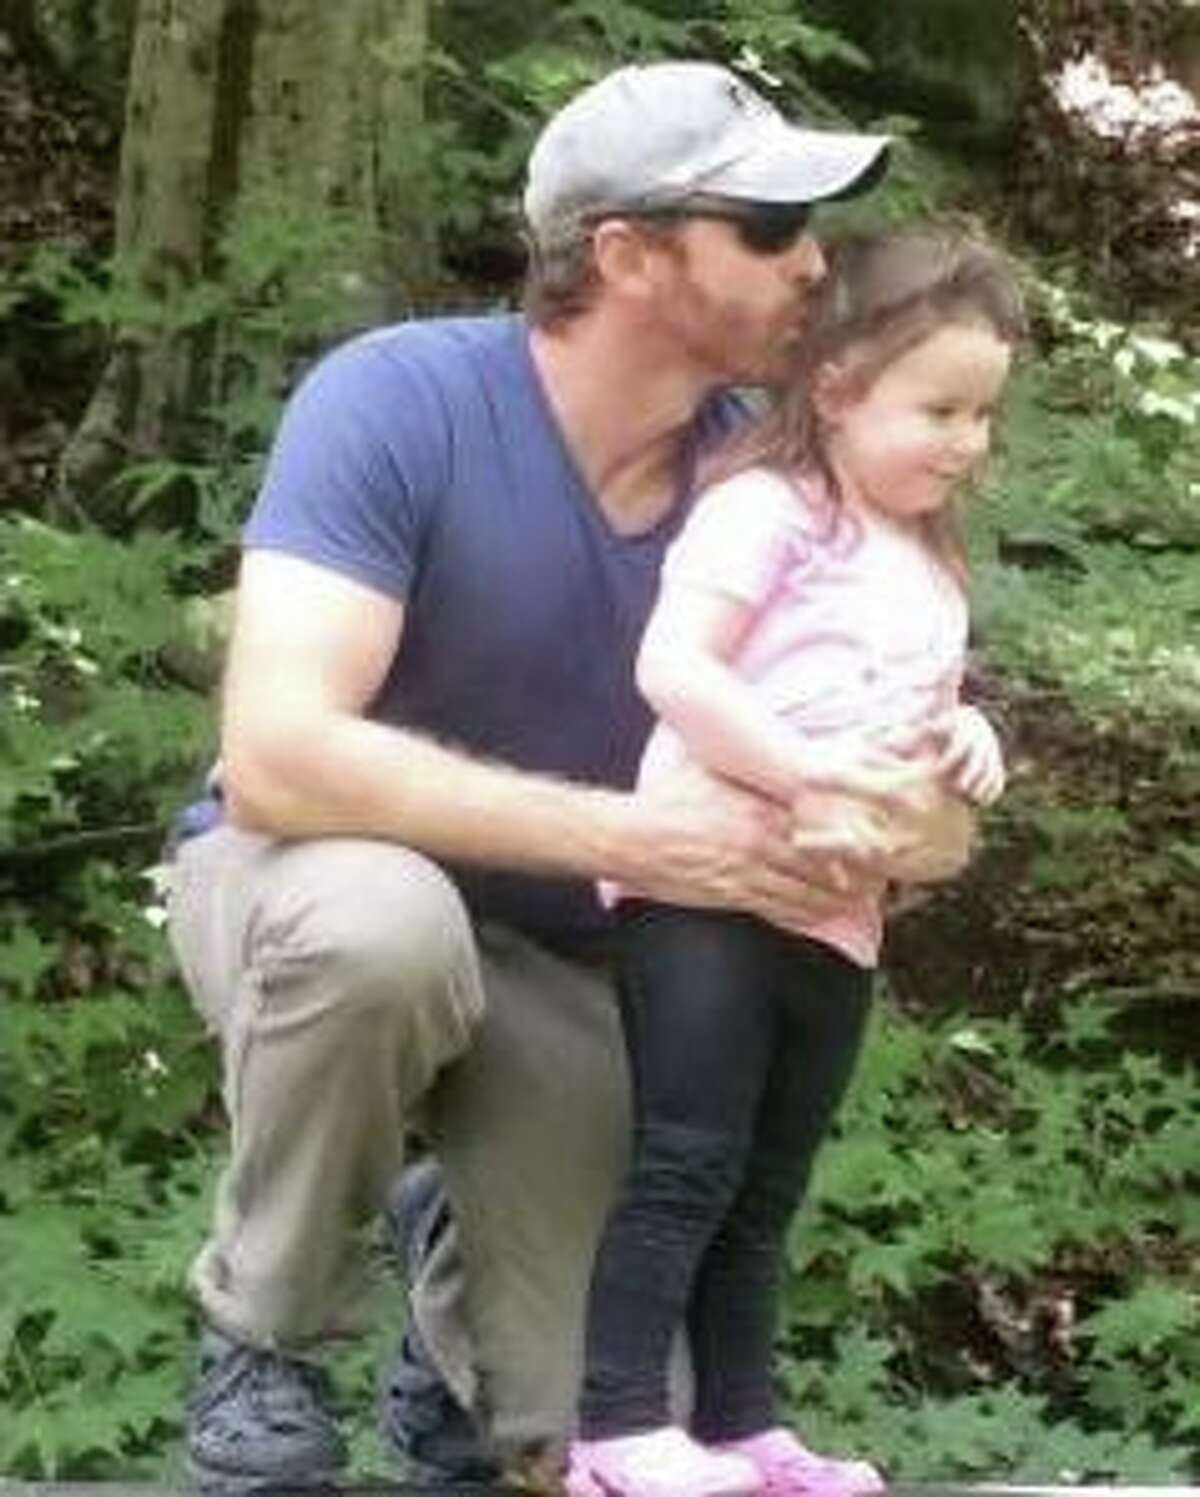 The family of Tyler Reeb, a veteran who took his life in 2019, will attend the State of the Union address with U.S. Sen. Richard Blumenthal, D-Conn., on Tuesday January 4, 2020 in Washington, D.C. Reeb is pictured here with his daughter Hailey.